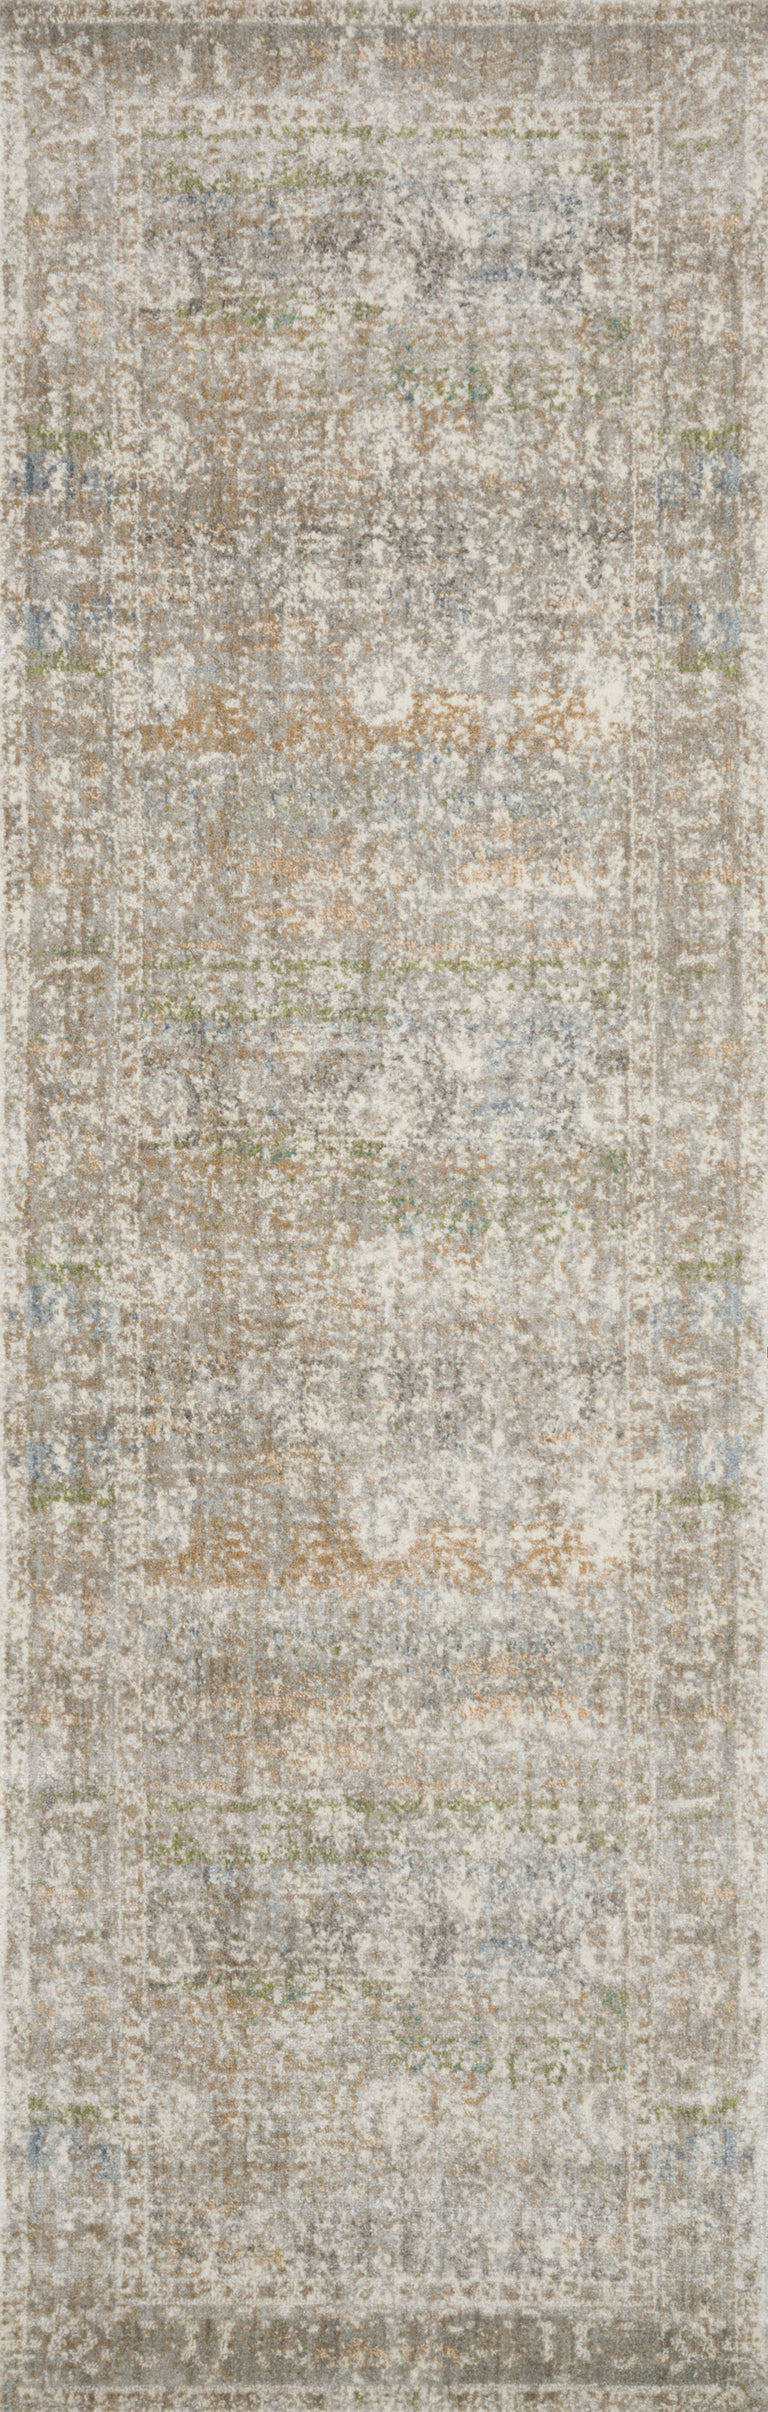 Loloi Rugs Anastasia Collection Rug in Grey, Multi - 6'7" x 9'2"